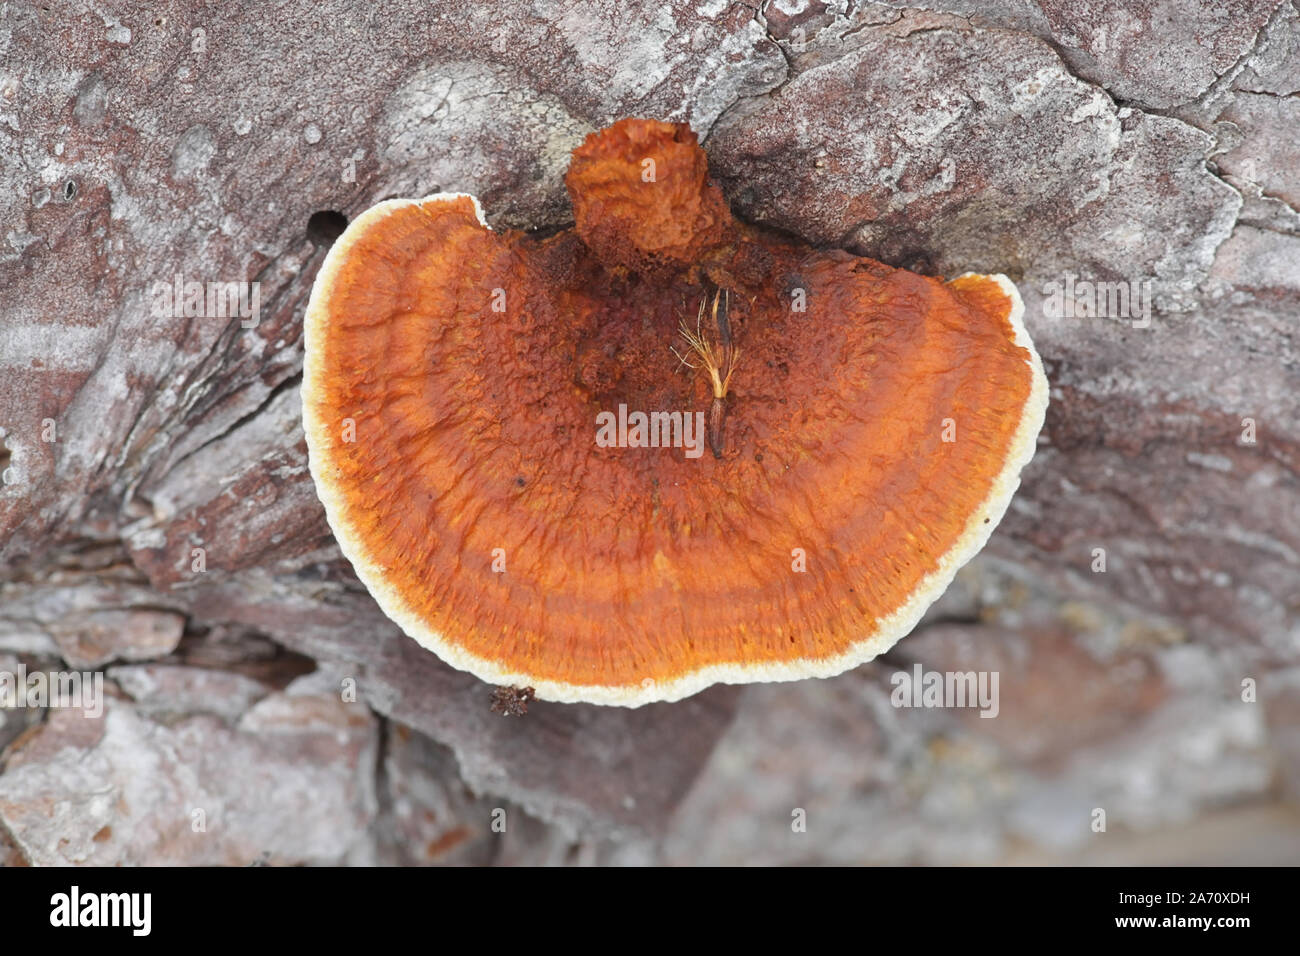 Gloeophyllum sepiarium, known as rusty gilled polypore or conifer mazgill, a bracket fungus from Finland Stock Photo